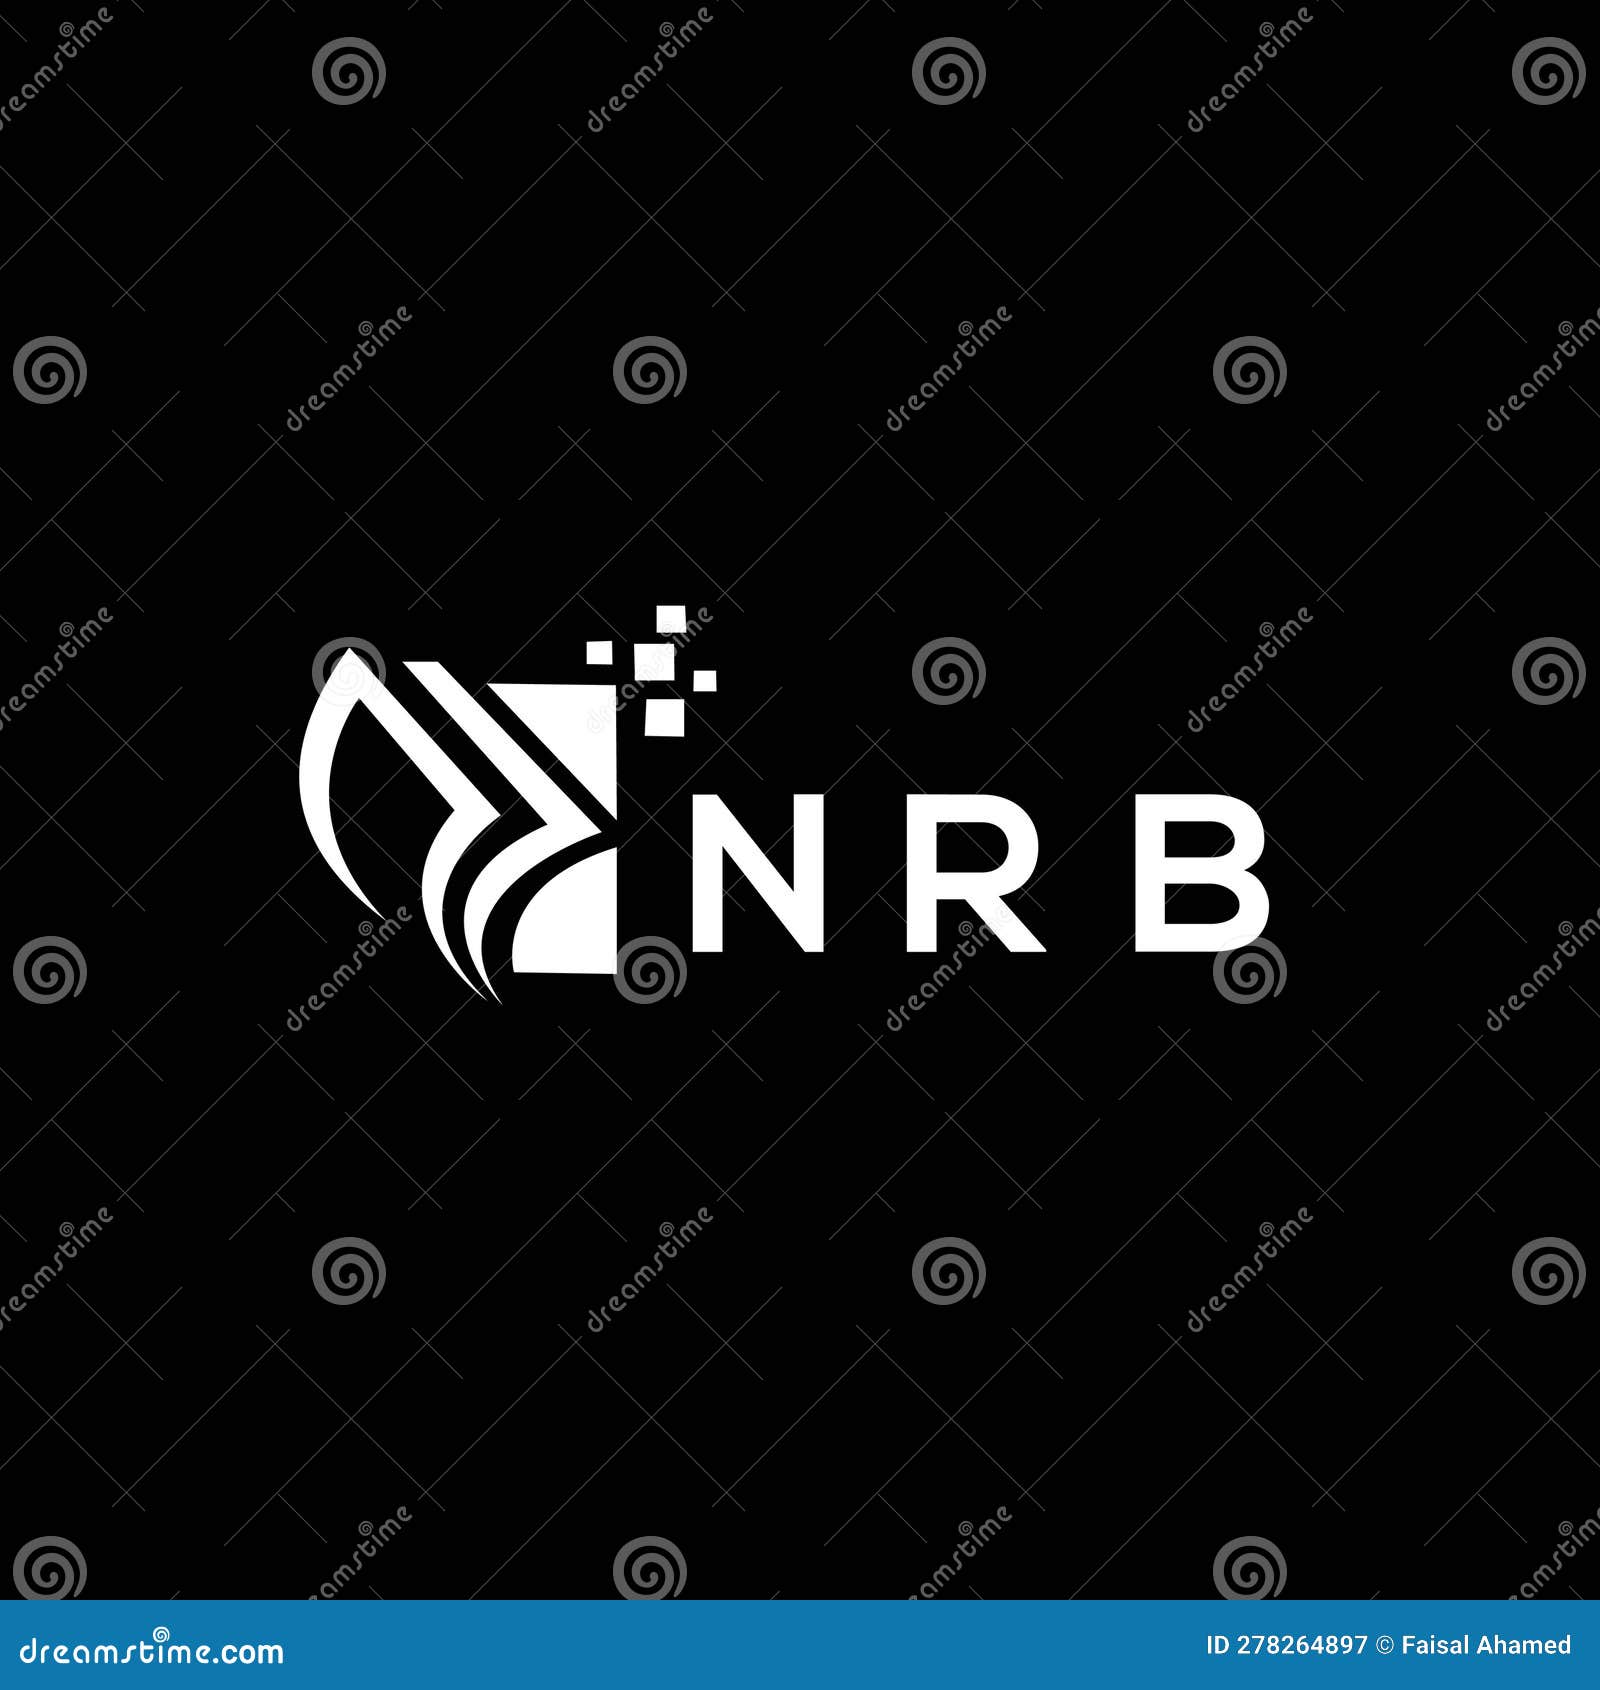 nrb credit repair accounting logo  on black background. nrb creative initials growth graph letter logo concept. nrb business